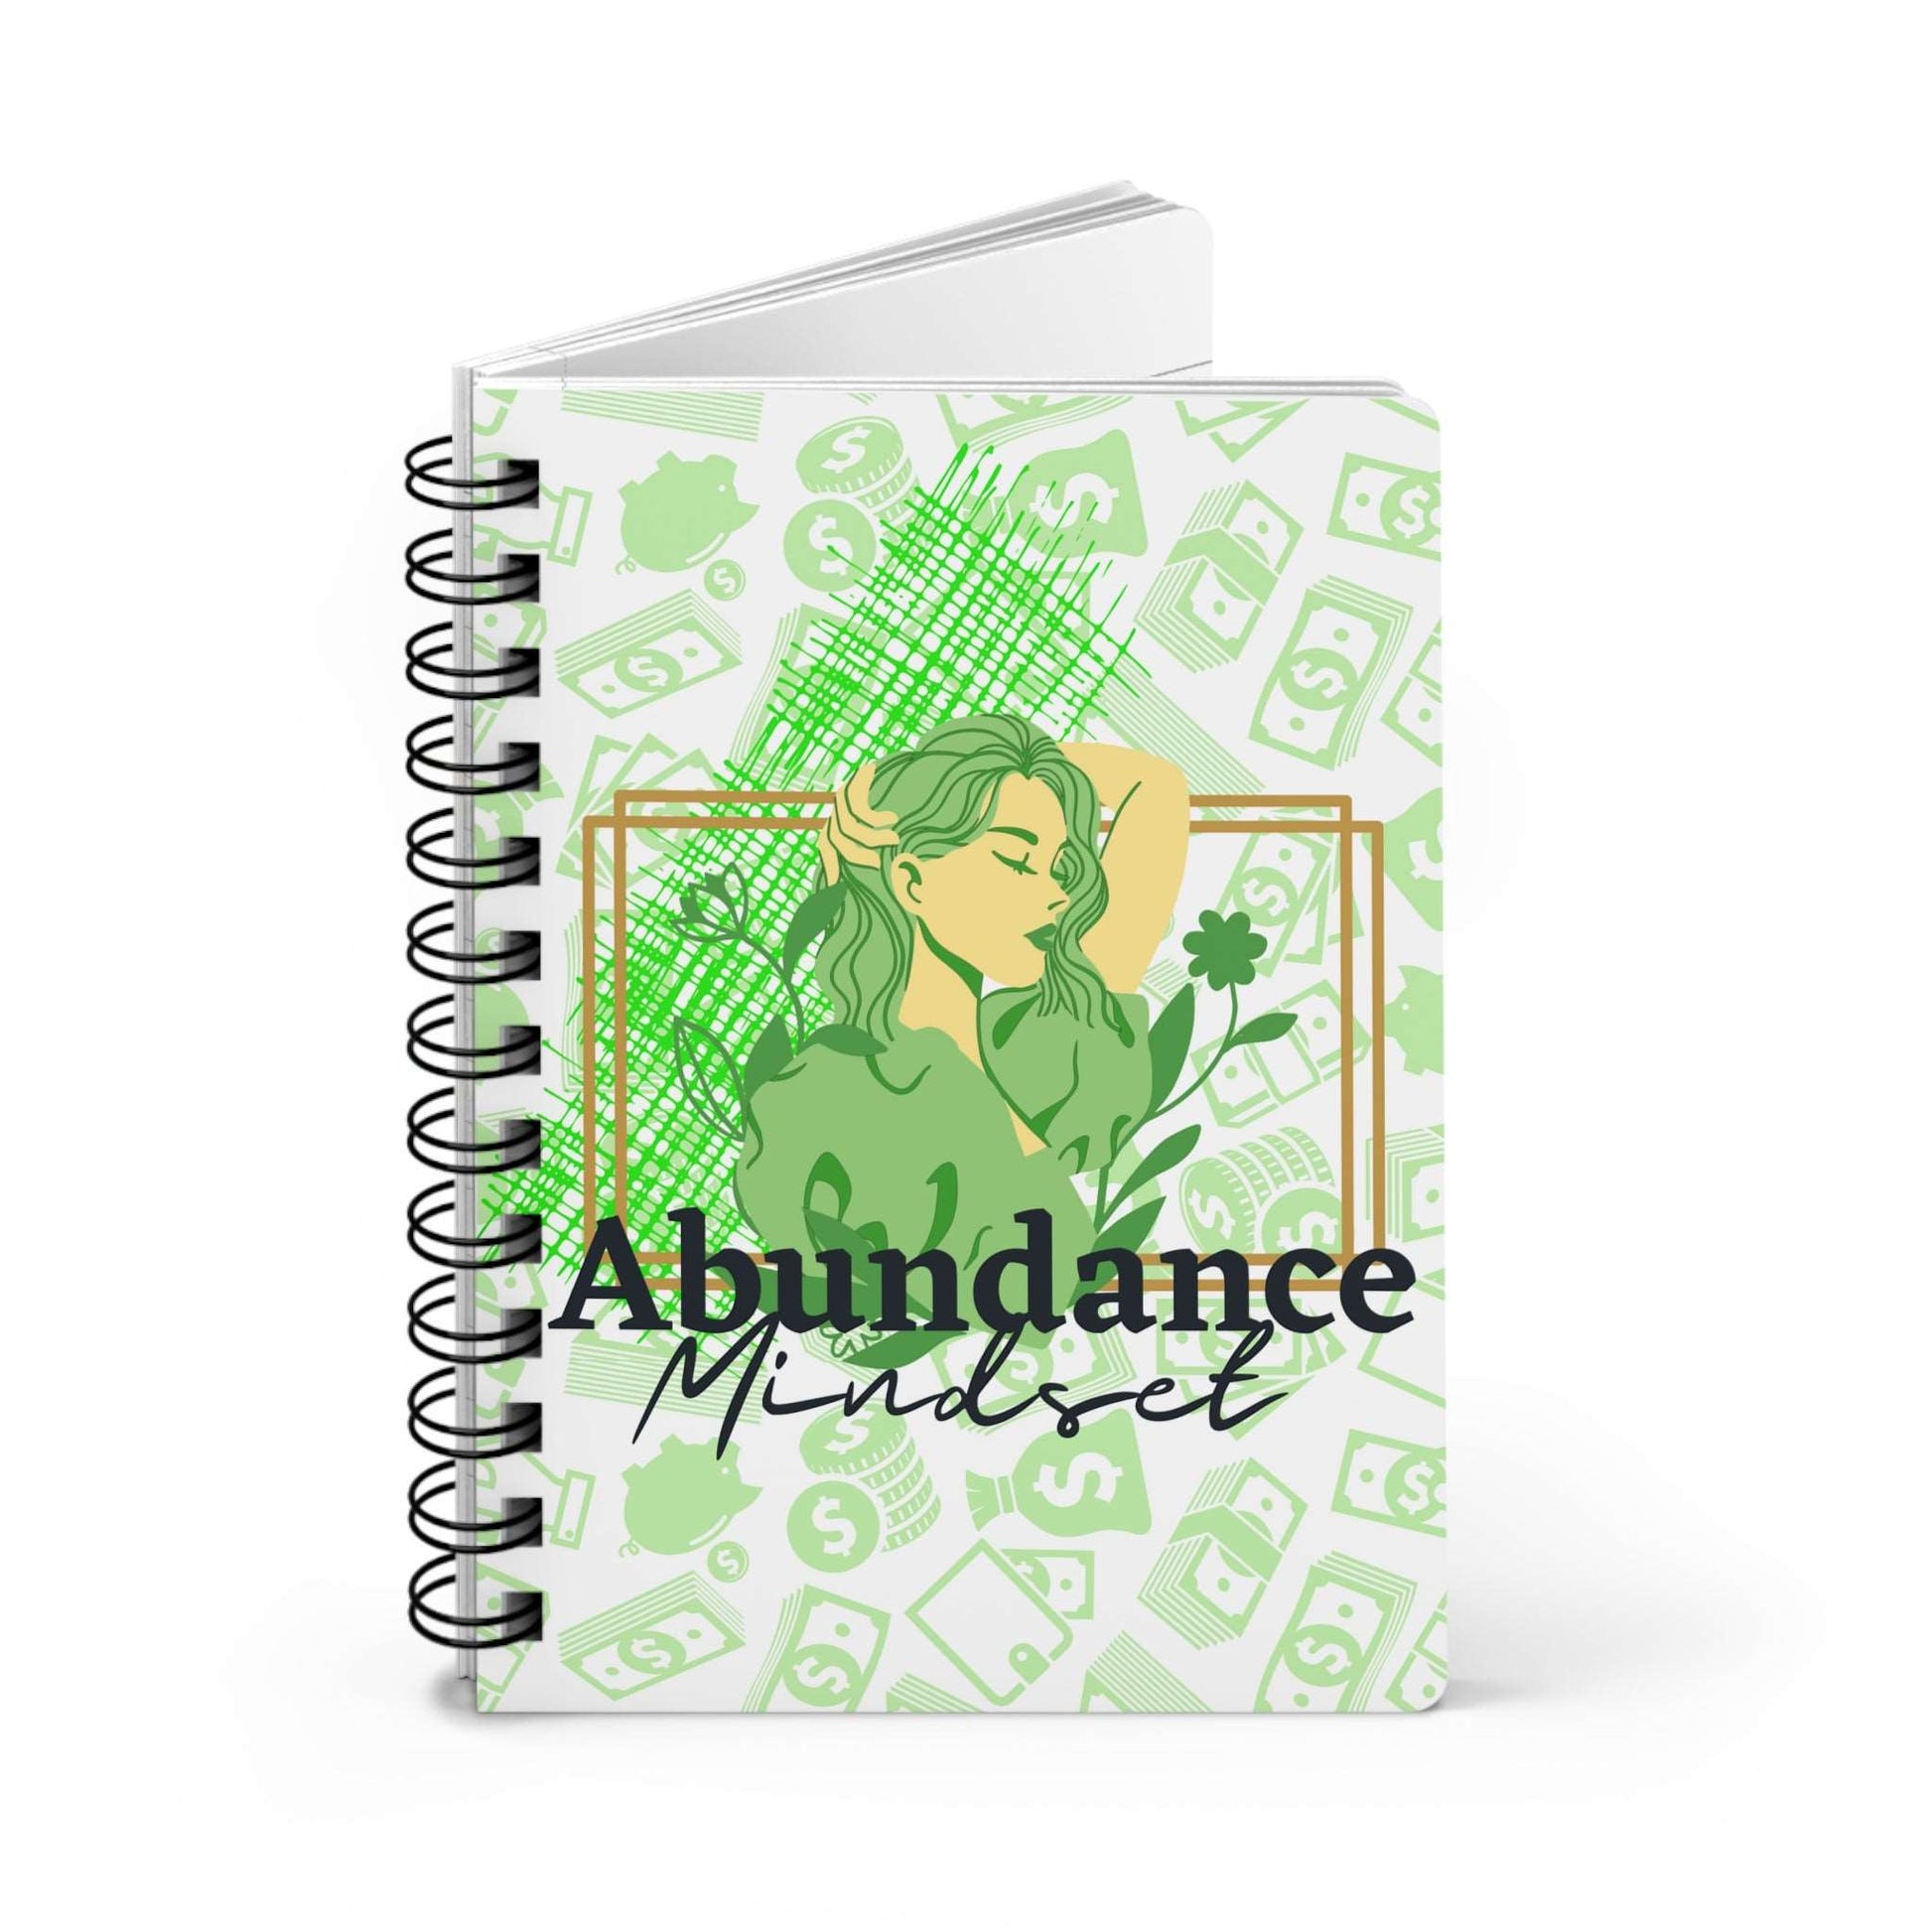 A spiral notebook with the words Abundance Mindset Journal with Journal Prompts on it.